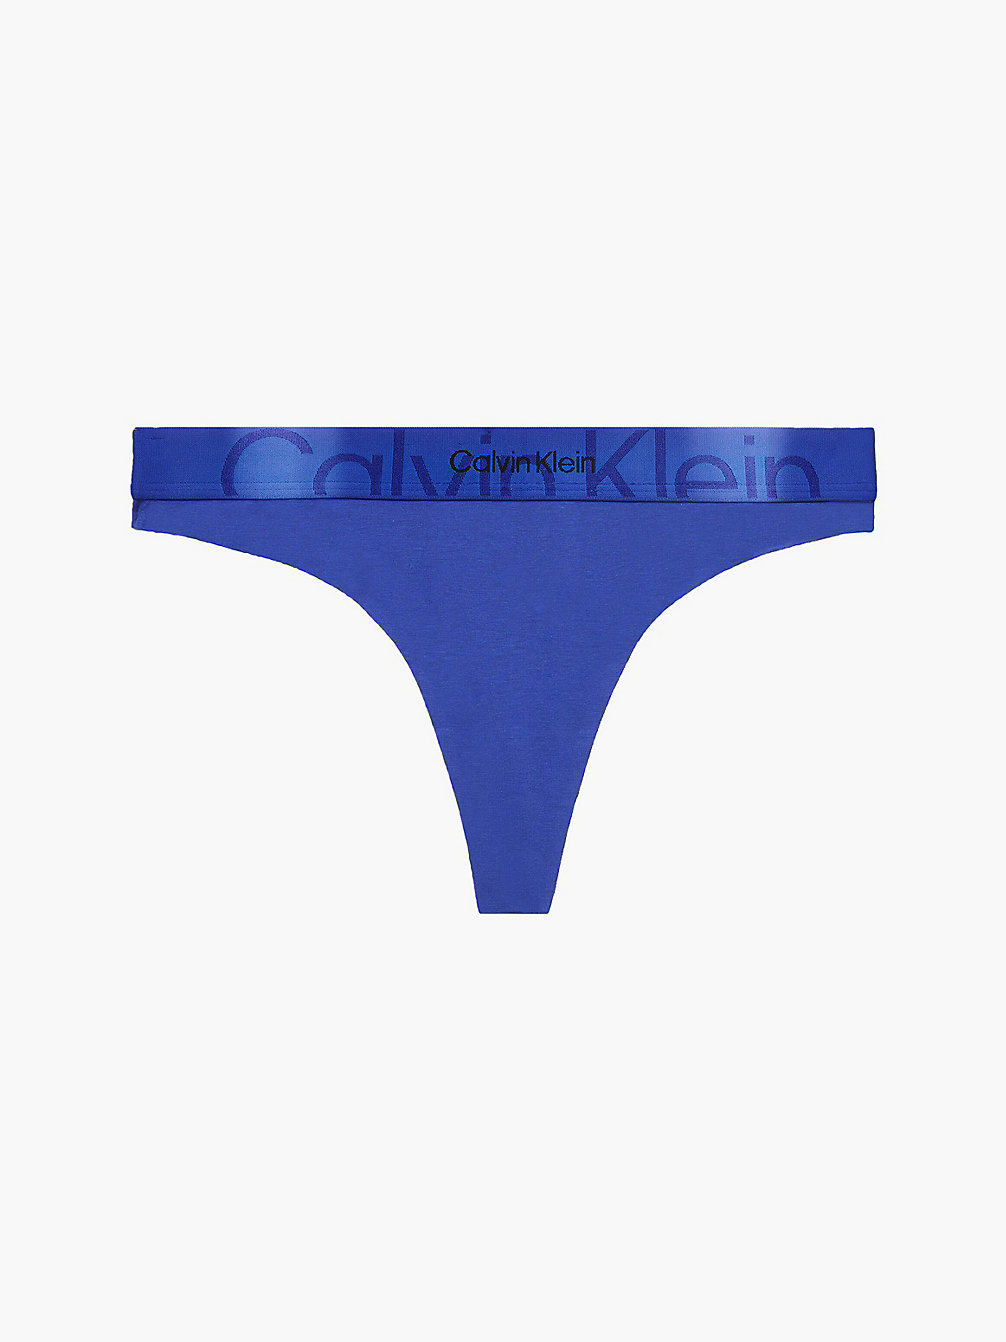 Perizoma - Embossed Icon > CLEMATIS > undefined donna > Calvin Klein